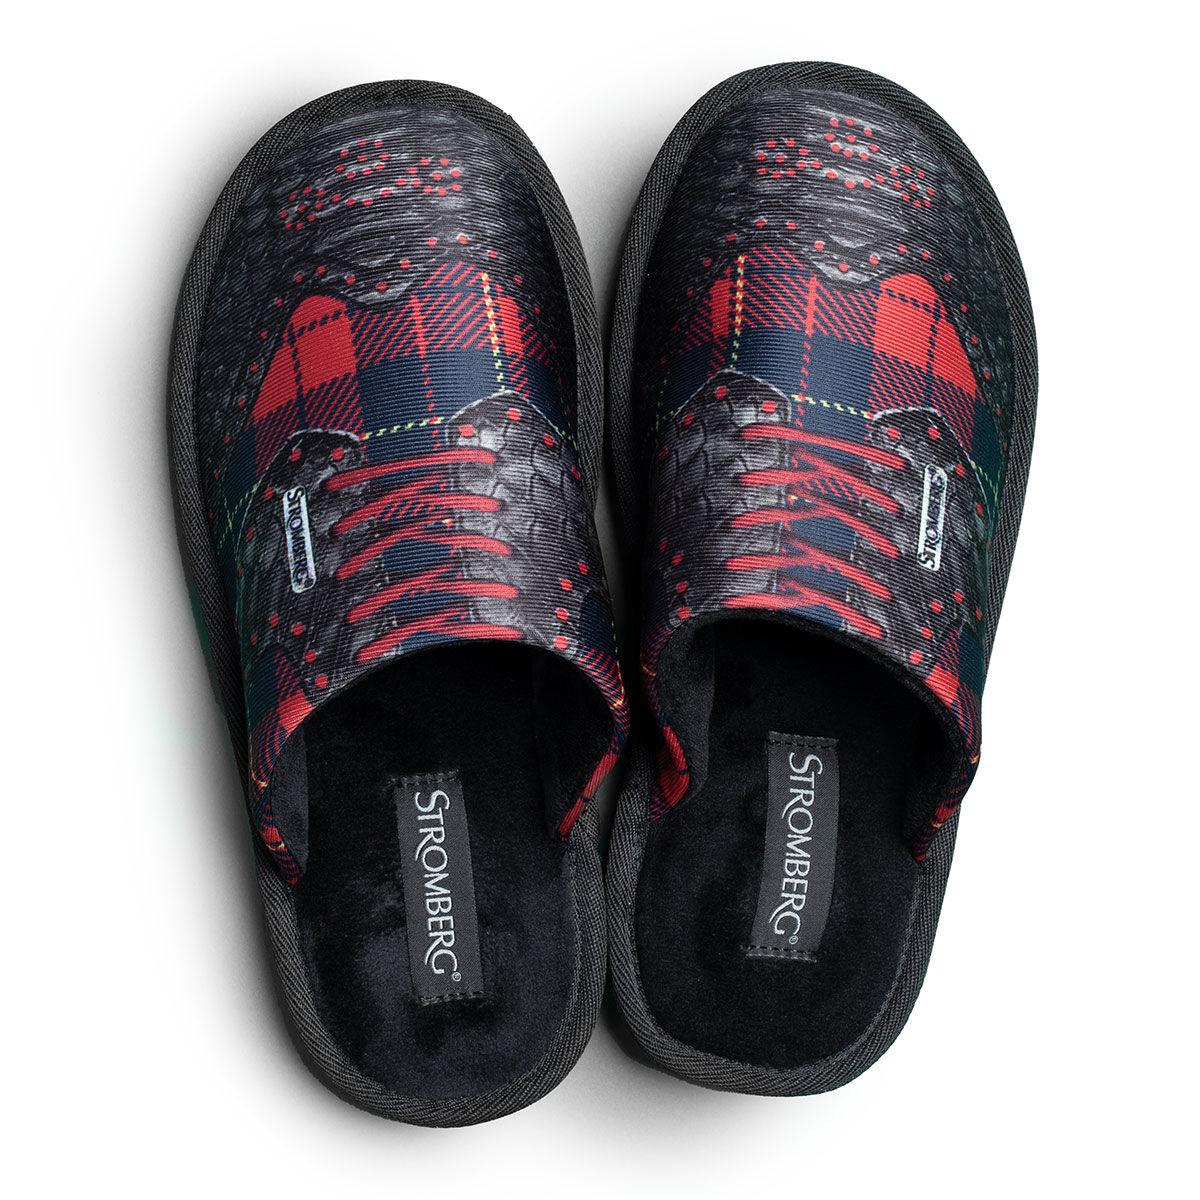 Stromberg Black, Grey and Red Comfortable Tartan Mule Golf Slippers, Size: 8 | American Golf - Father's Day Gift von Stromberg